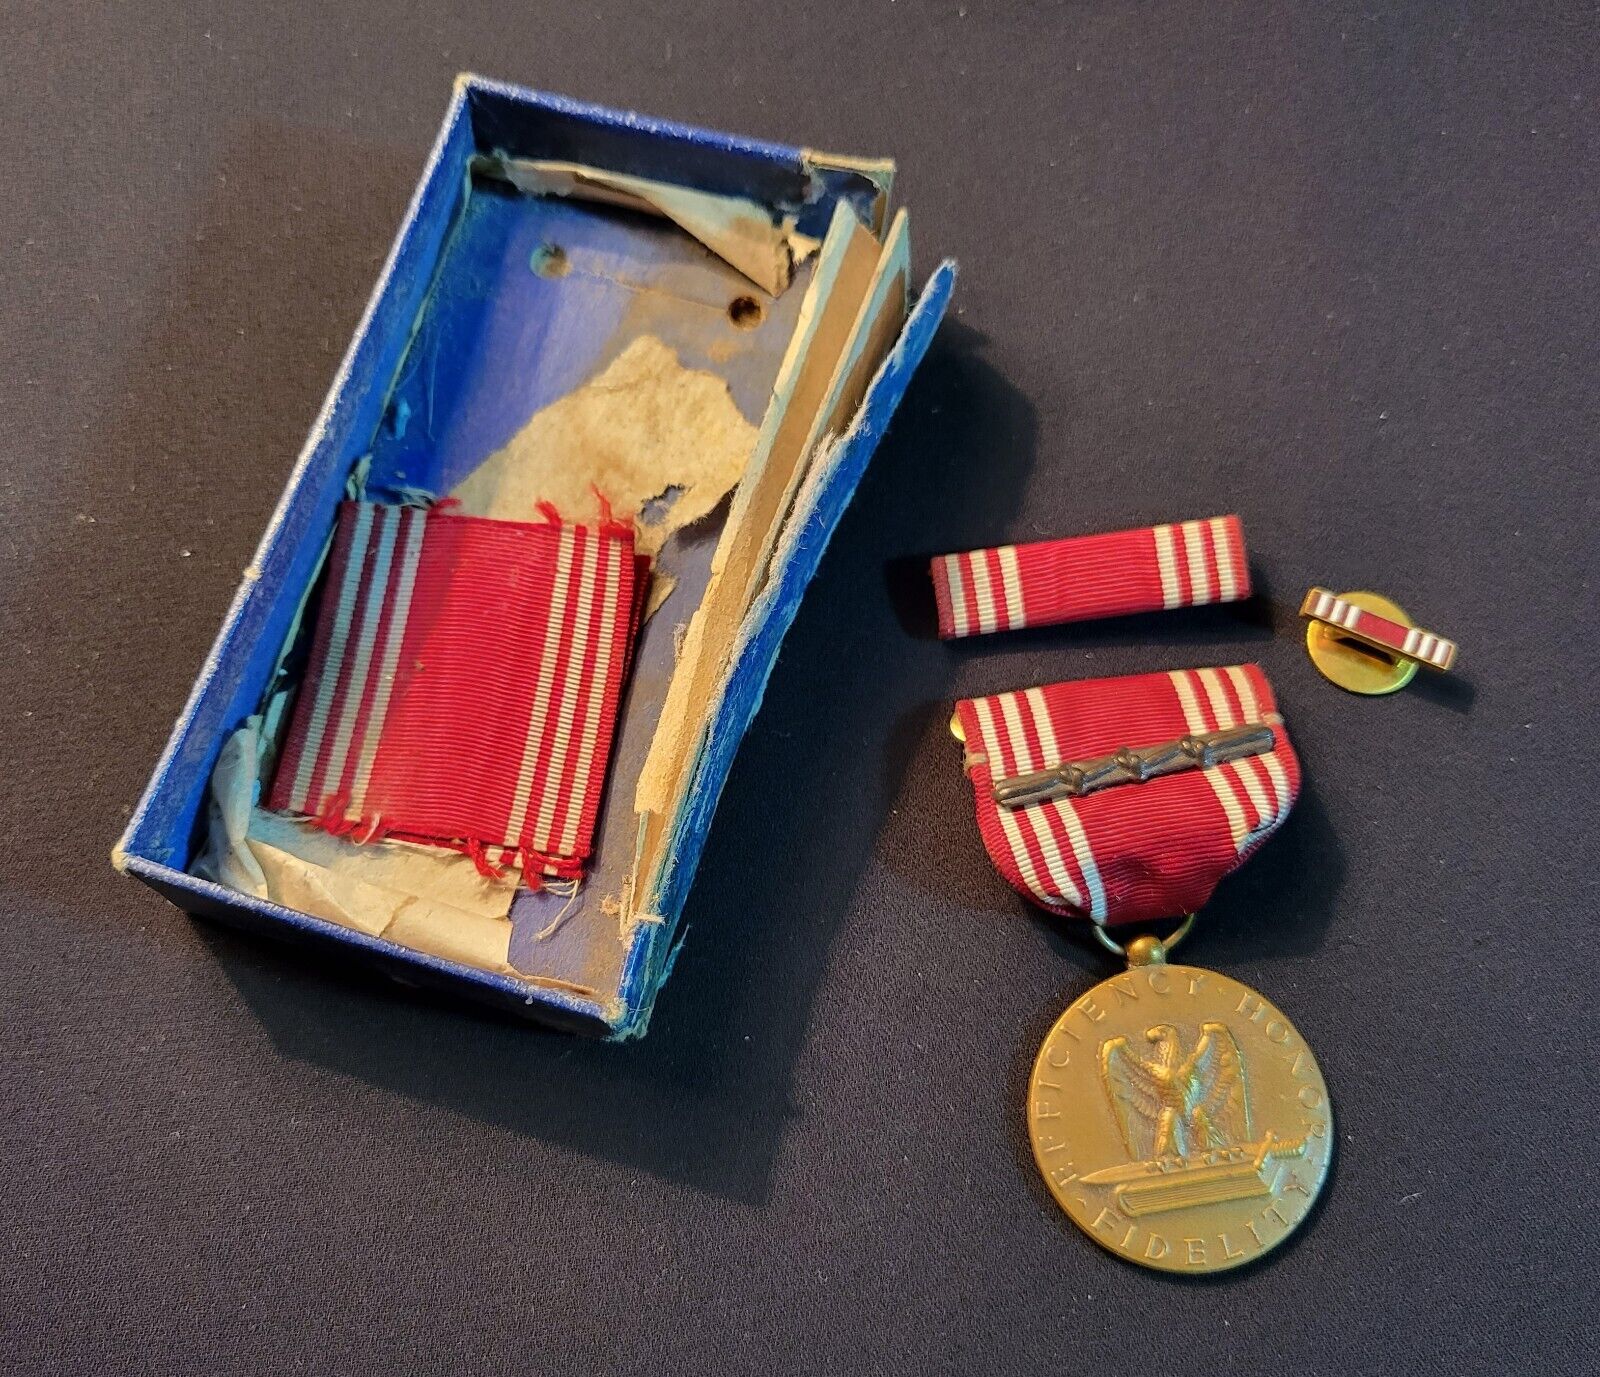 Good Conduct Military Medal, Ribbon, and Lapel Pin with original Box - WWII Era